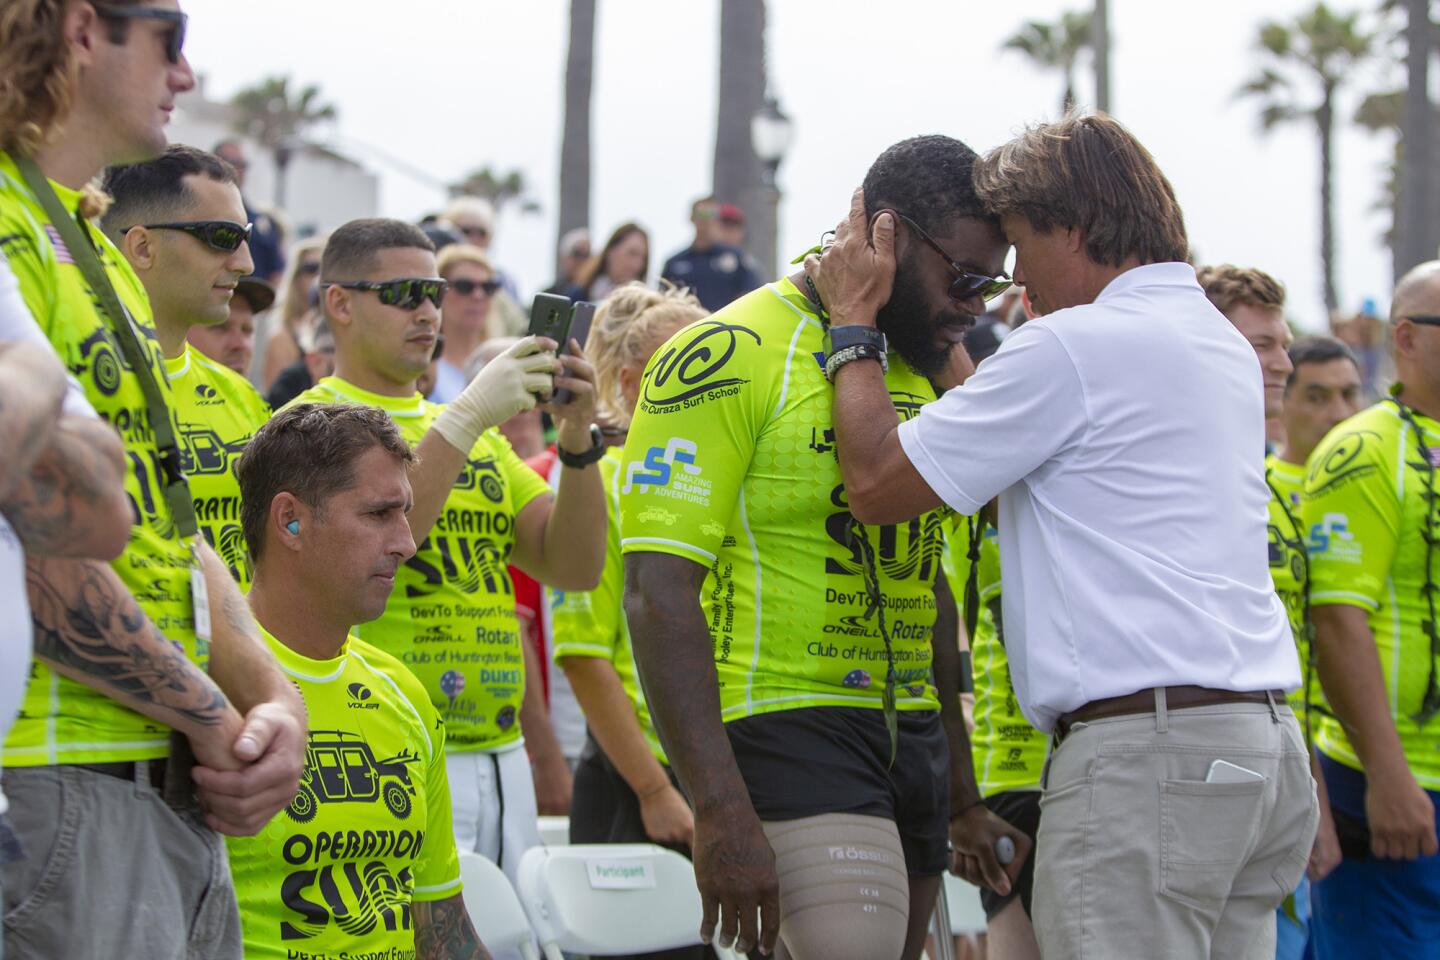 Photo Gallery: The 2nd Annual Operation Surf in Huntington Beach